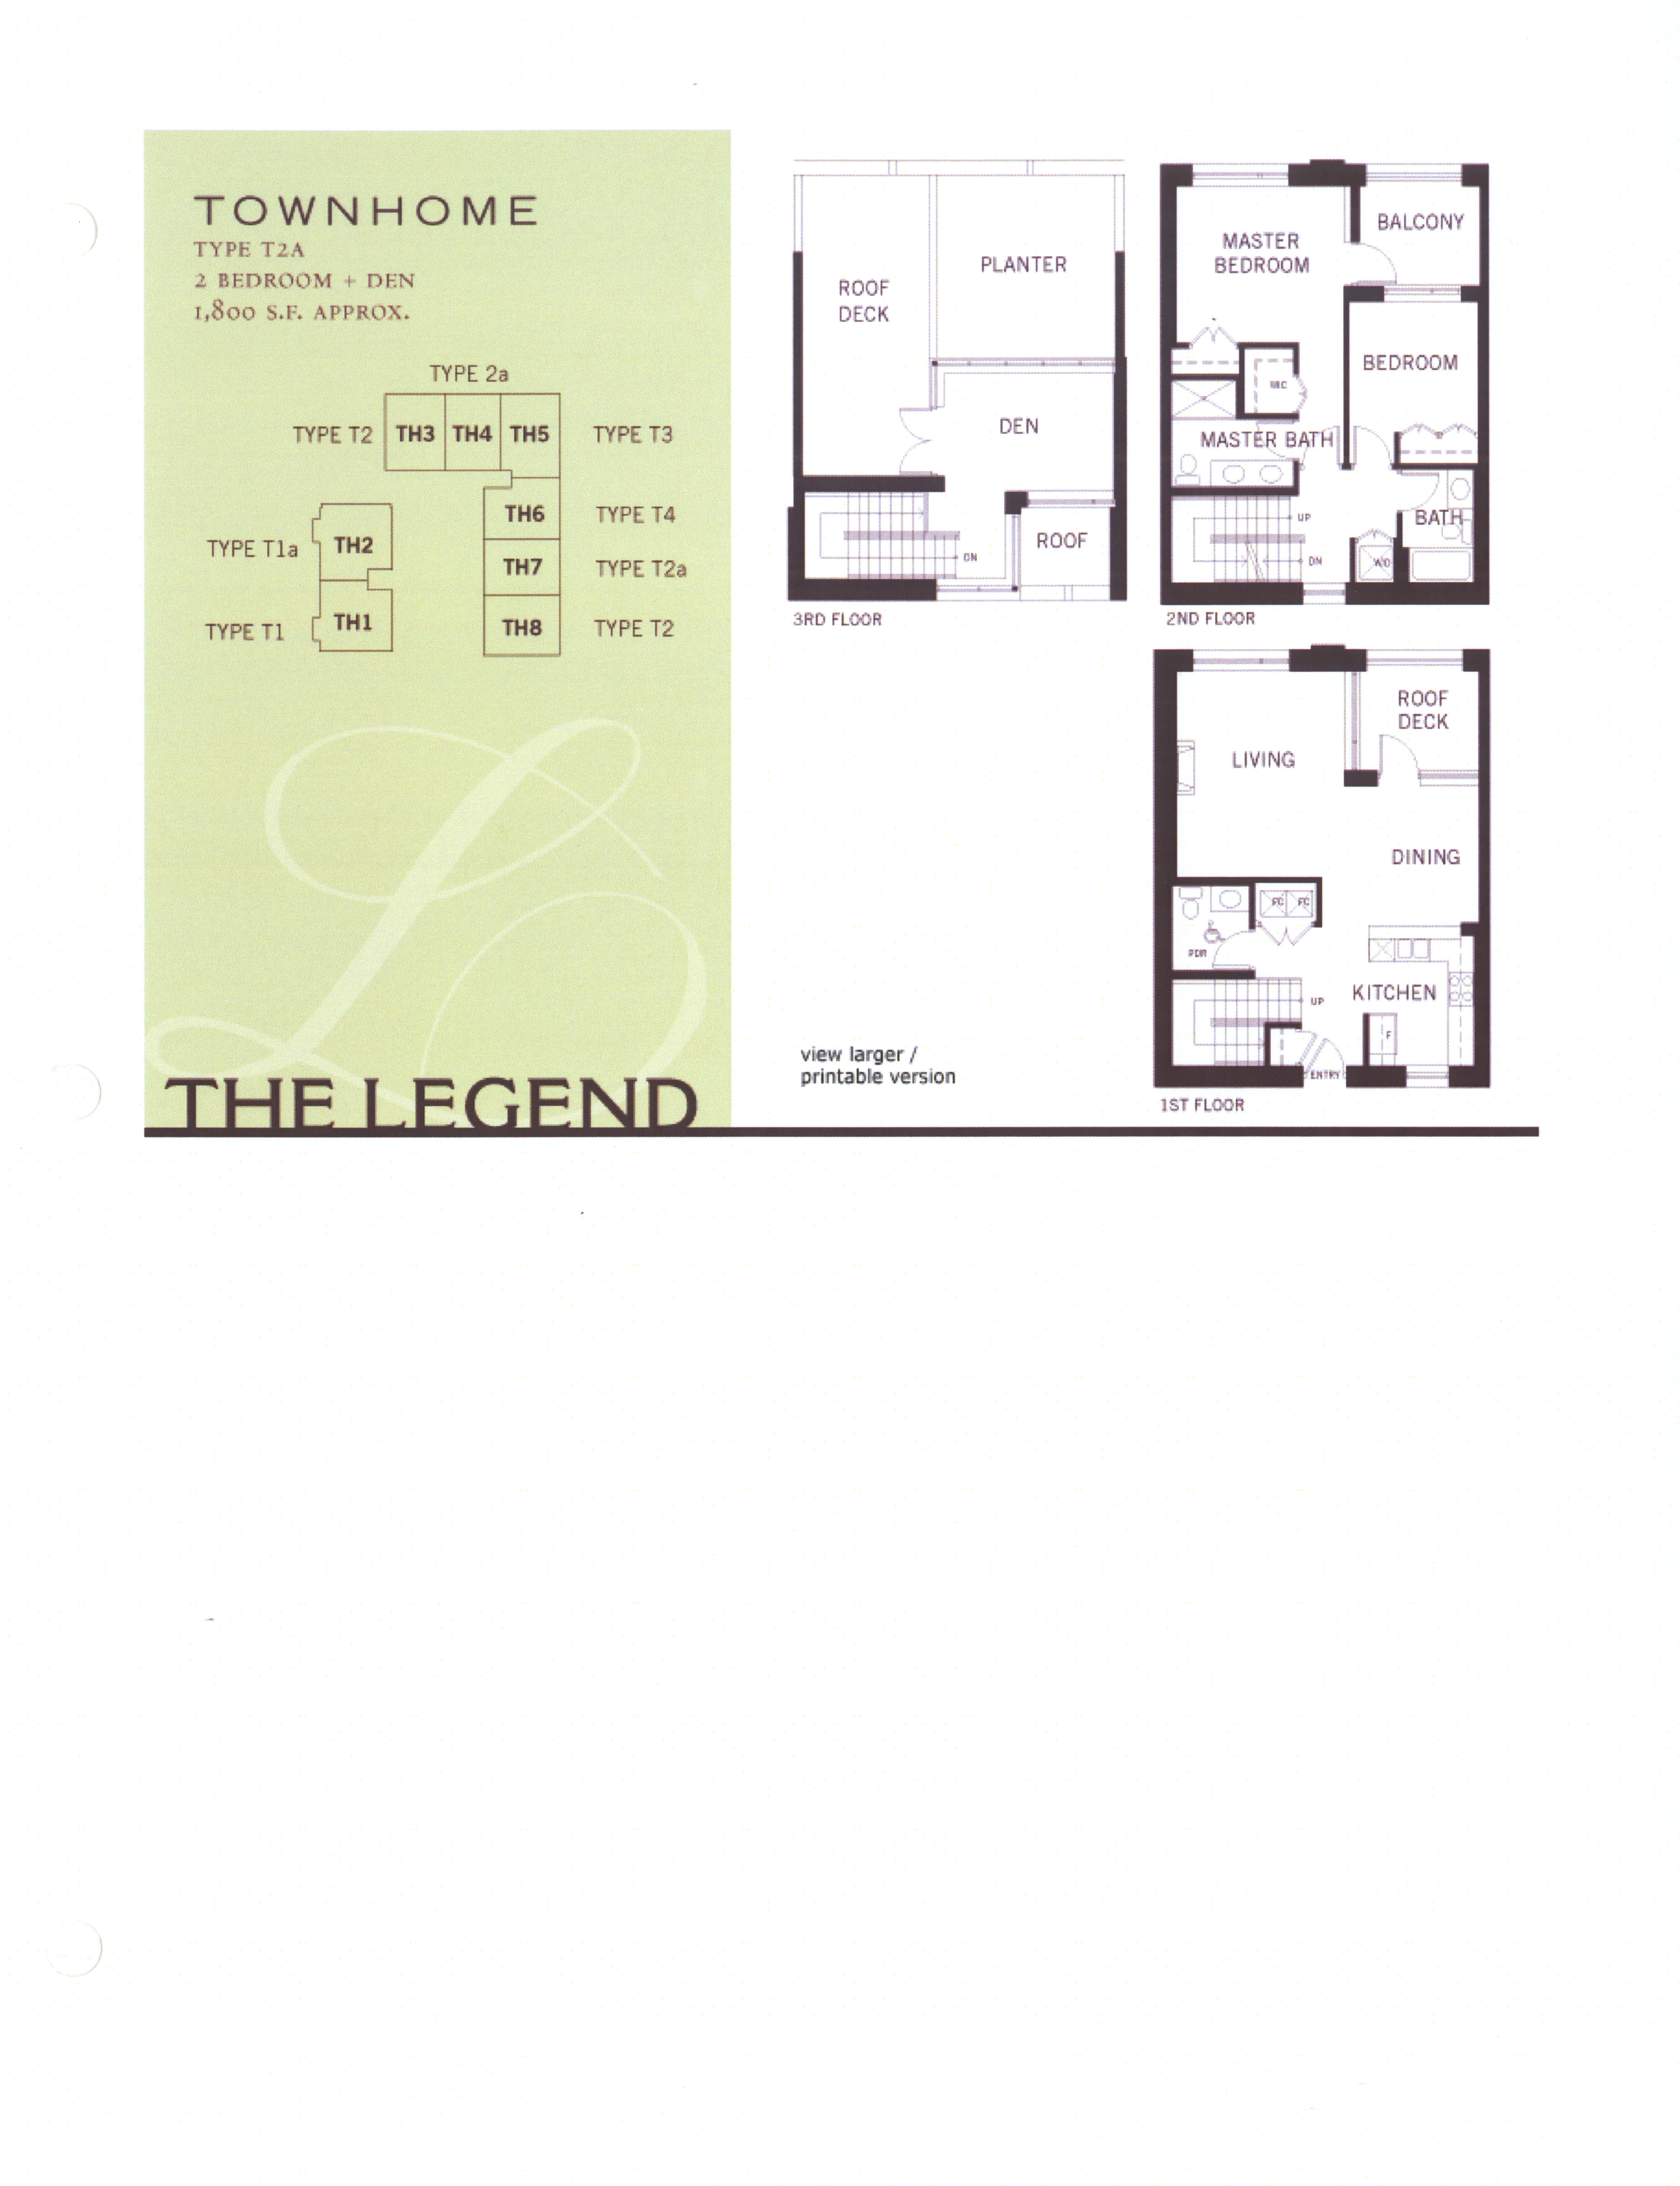 The Legend Floor Plan Townhome Type T2A San Diego